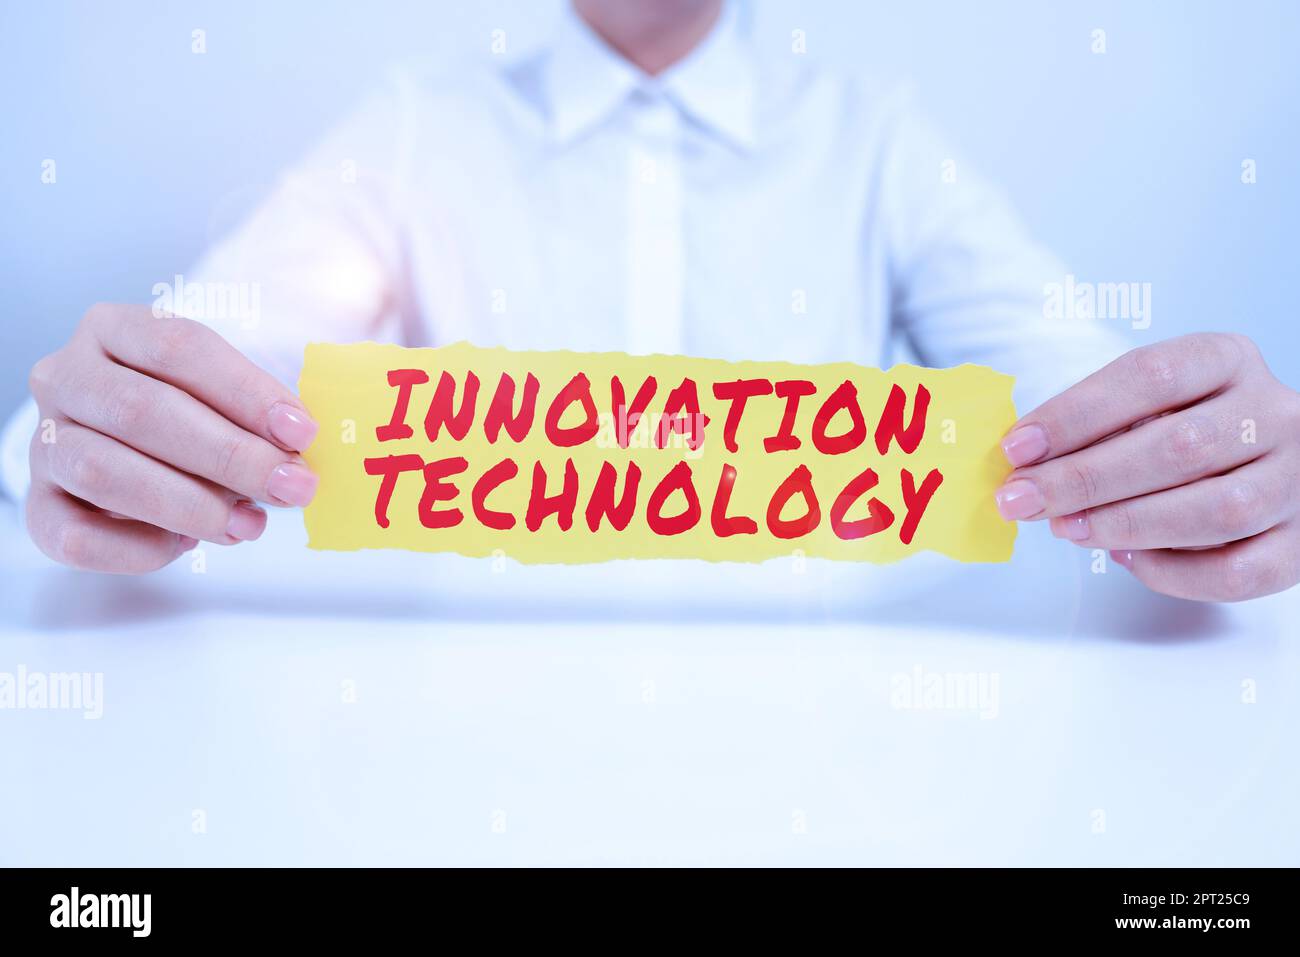 Inspiration showing sign Innovation Technology, Concept meaning New Idea or Method of Technical or Scientific nature Stock Photo